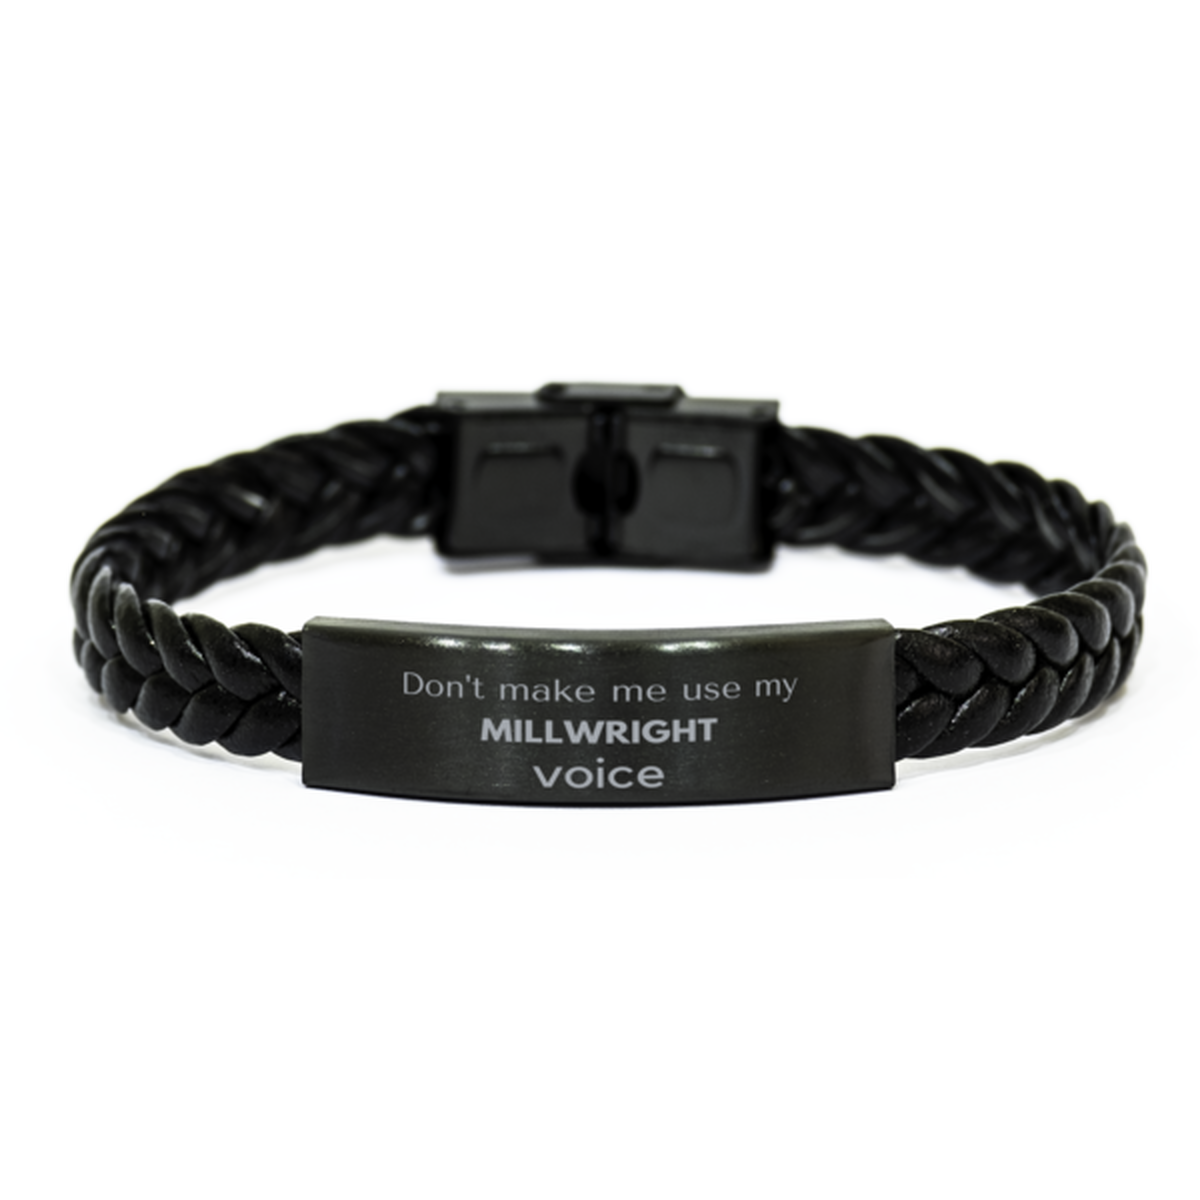 Don't make me use my Millwright voice, Sarcasm Millwright Gifts, Christmas Millwright Braided Leather Bracelet Birthday Unique Gifts For Millwright Coworkers, Men, Women, Colleague, Friends